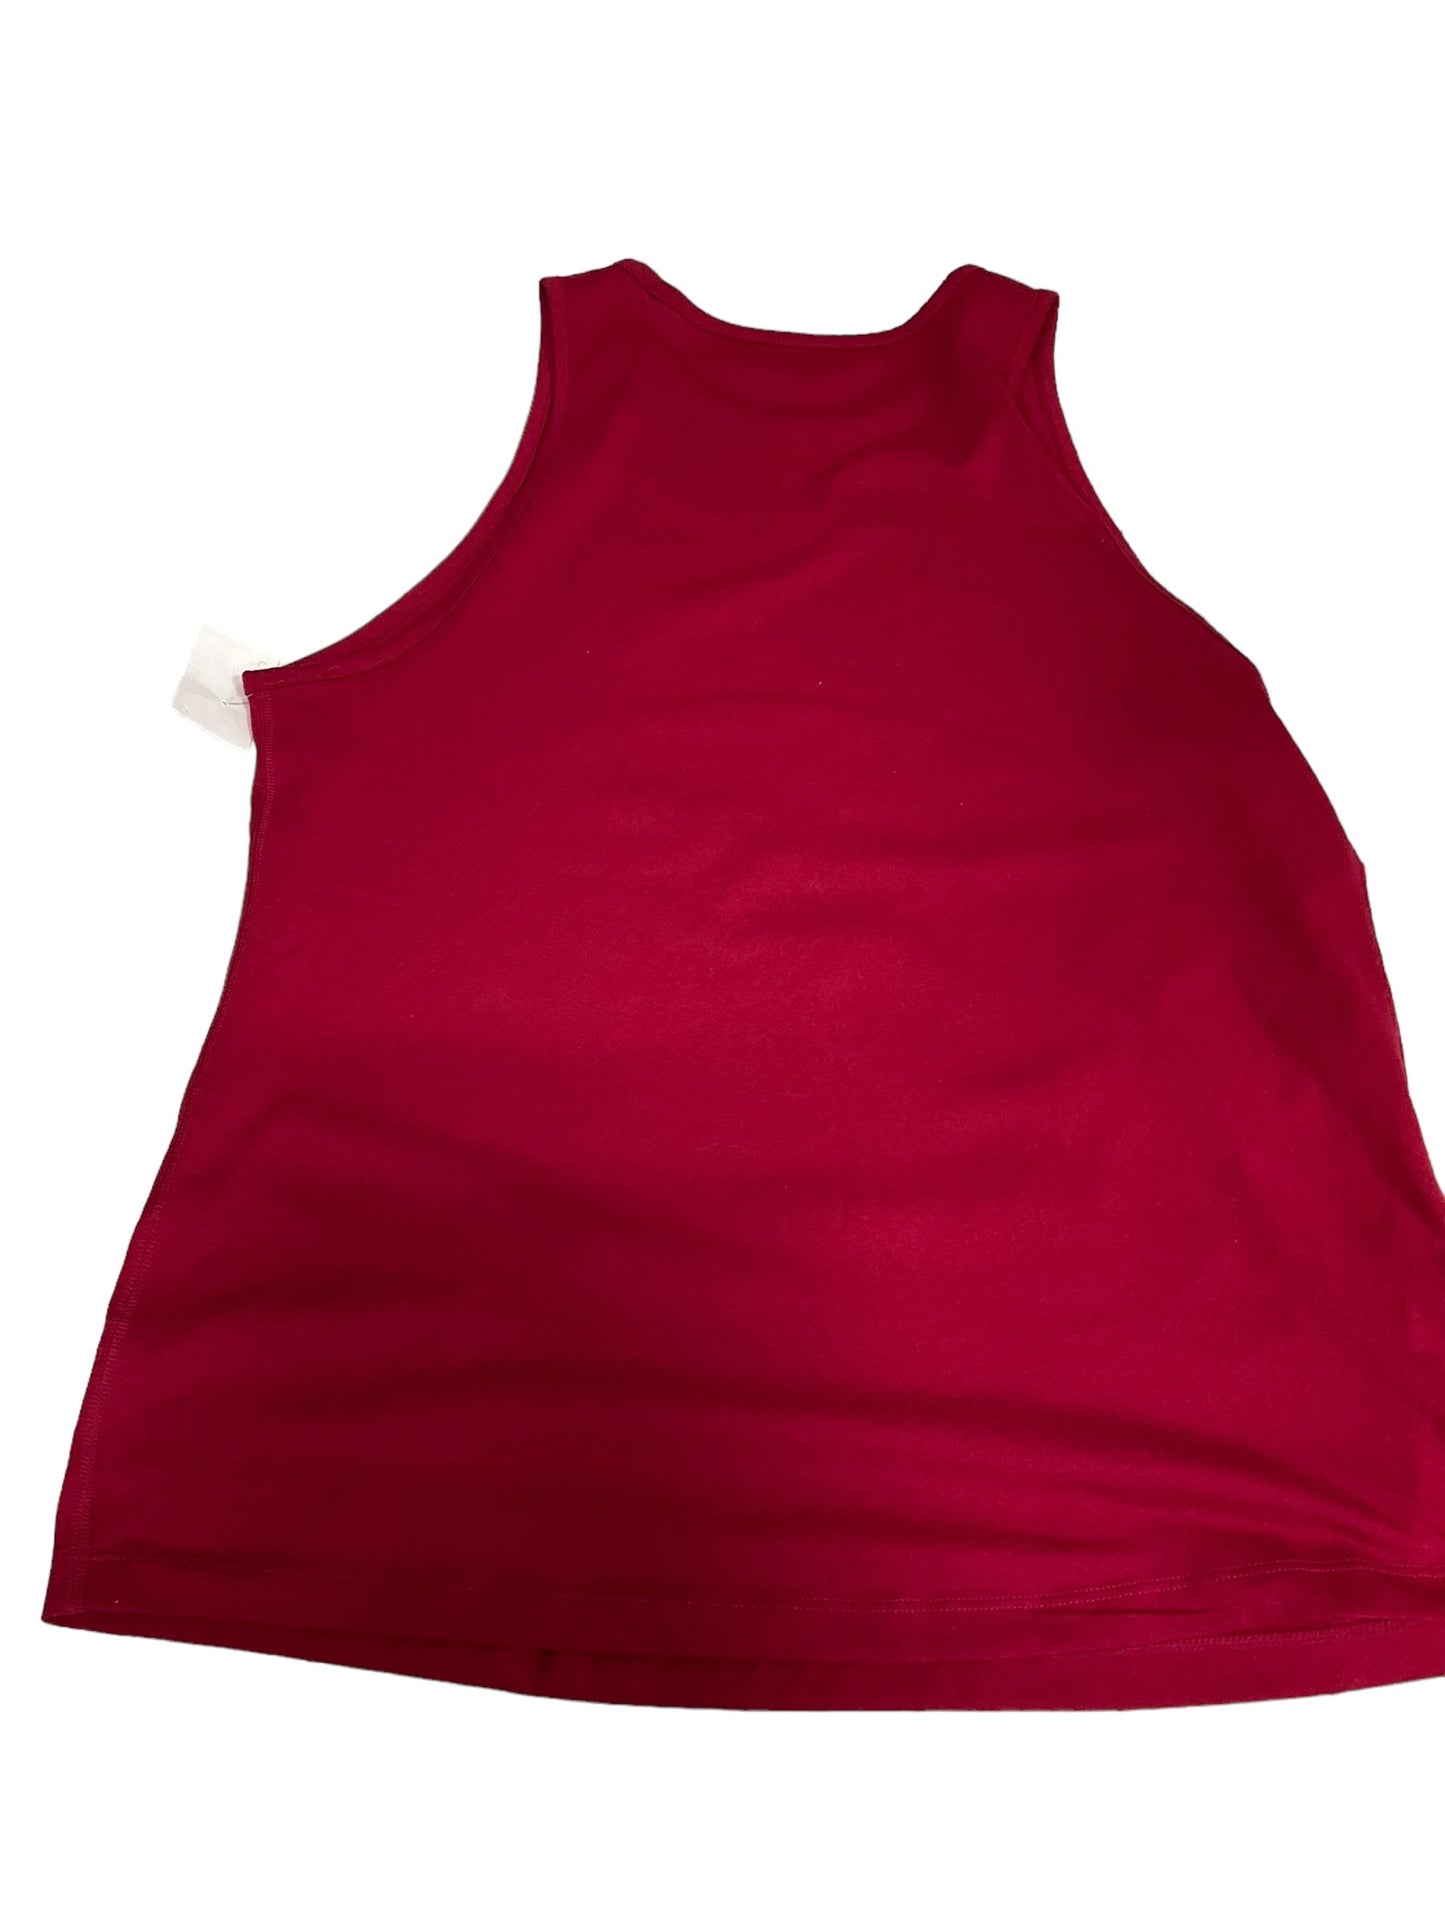 Red Athletic Tank Top Nike, Size M